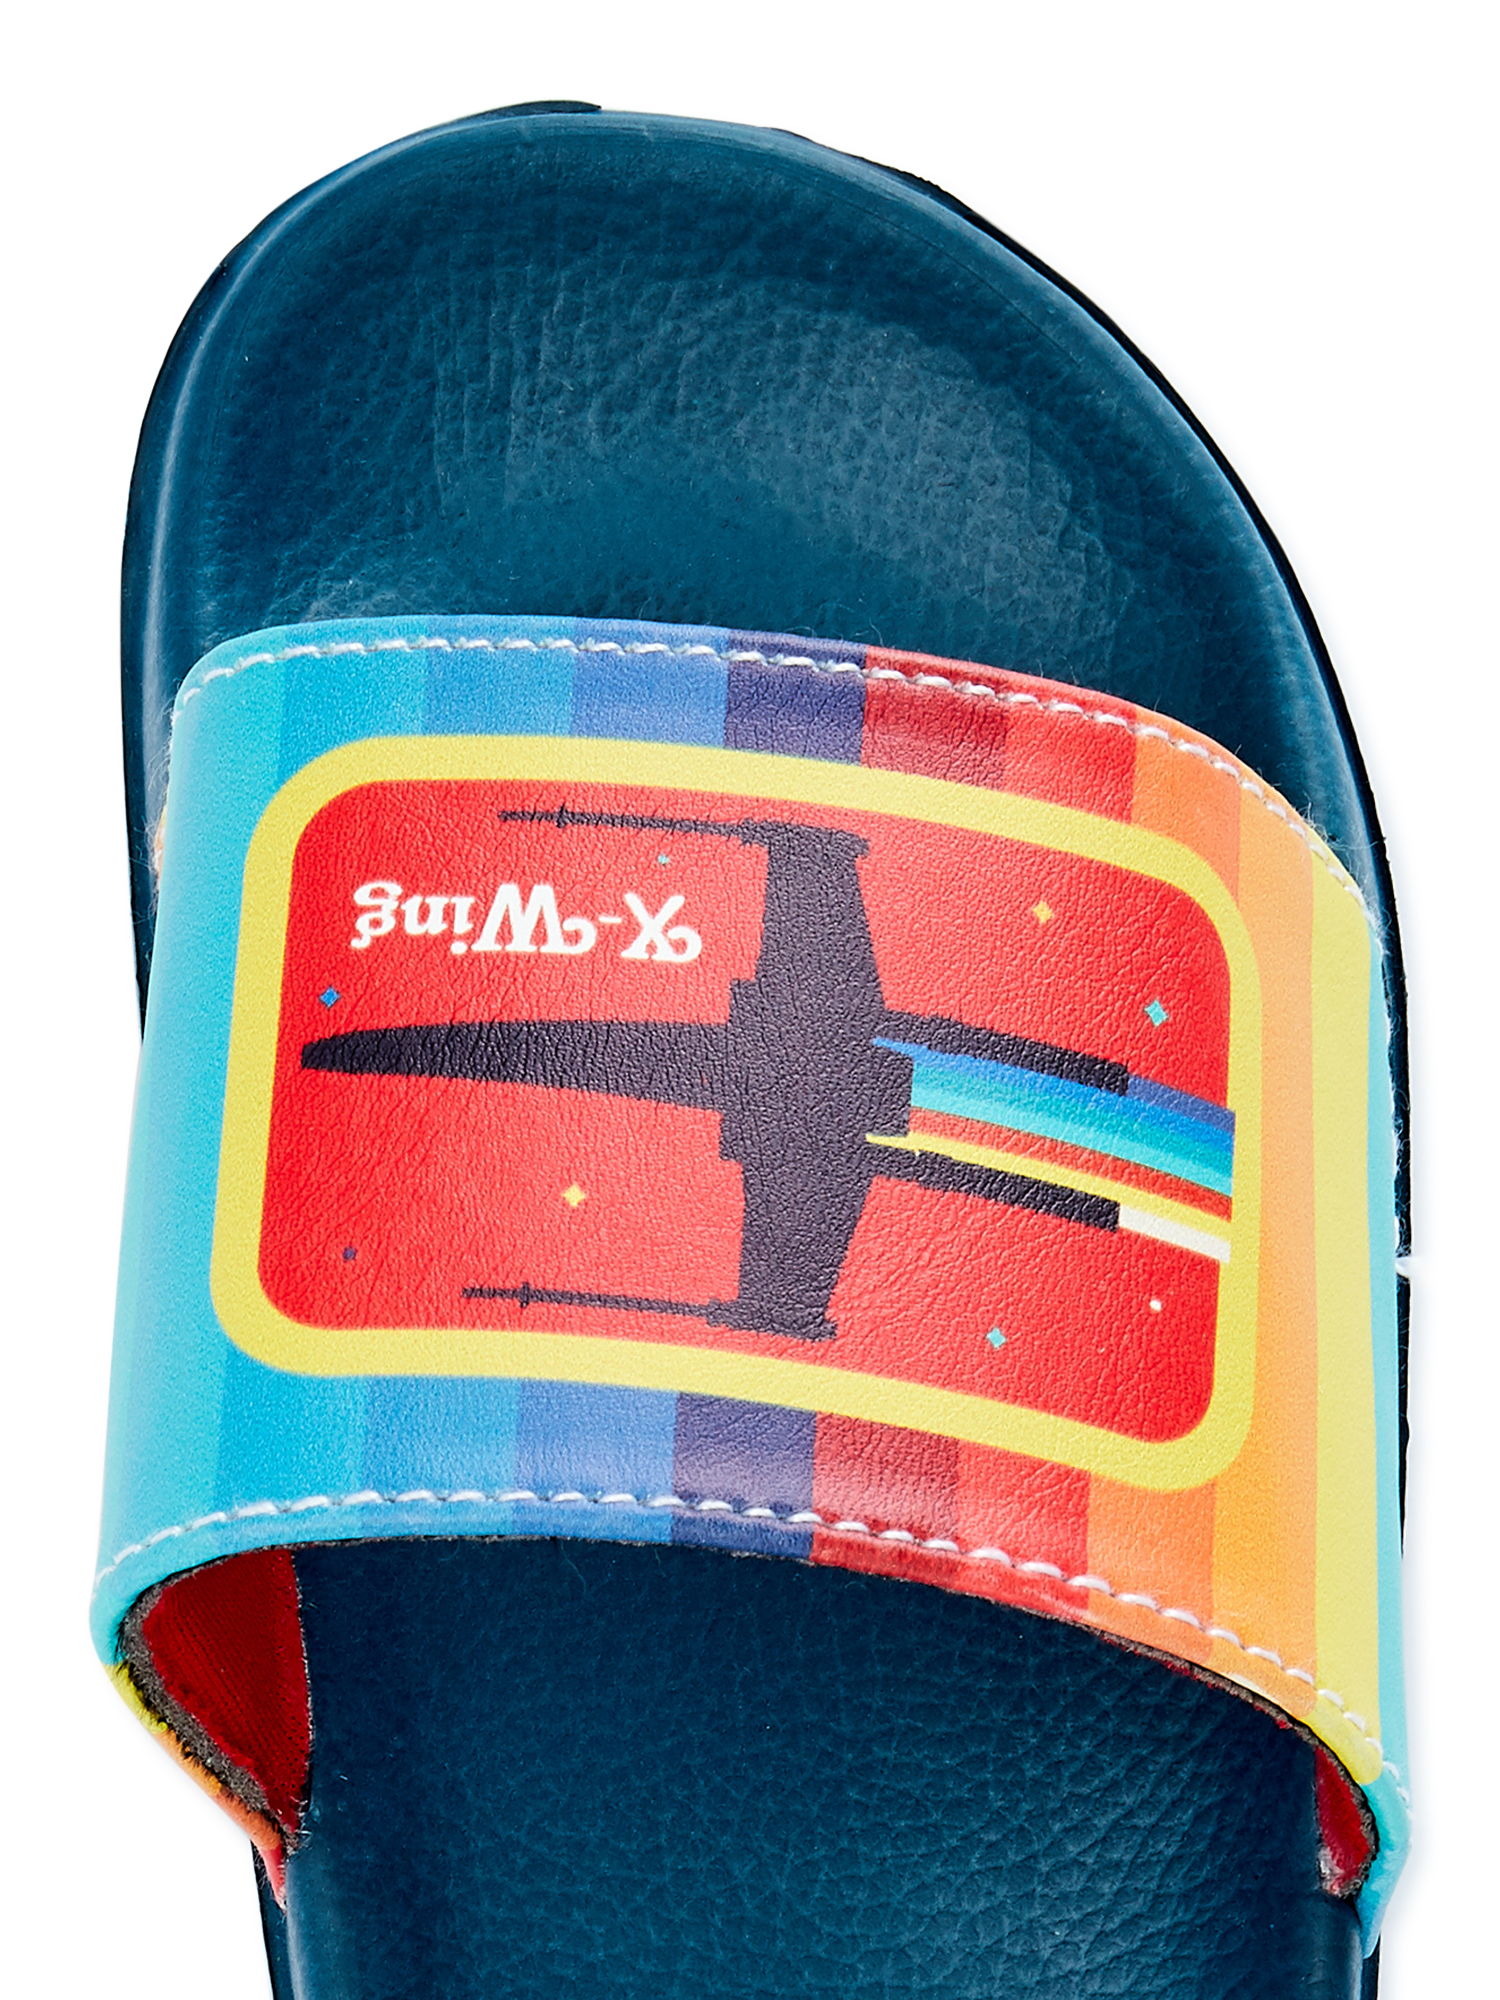 Star Wars Boys X-Wing Slide Sandals with Screen-Print - image 4 of 6